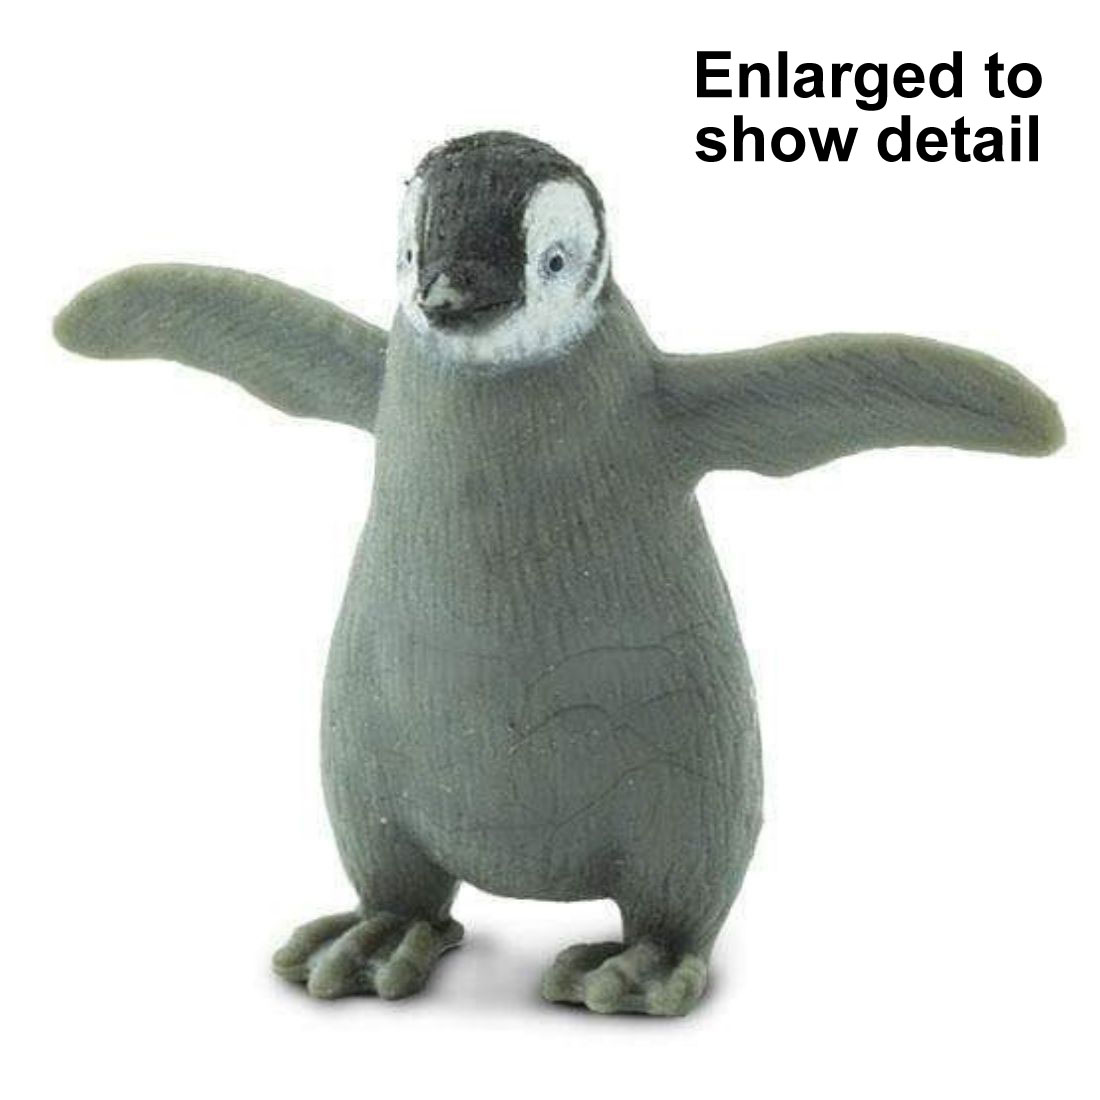 Emperor Penguin Chick Mini Figurine with the text Enlarged to Show Detail